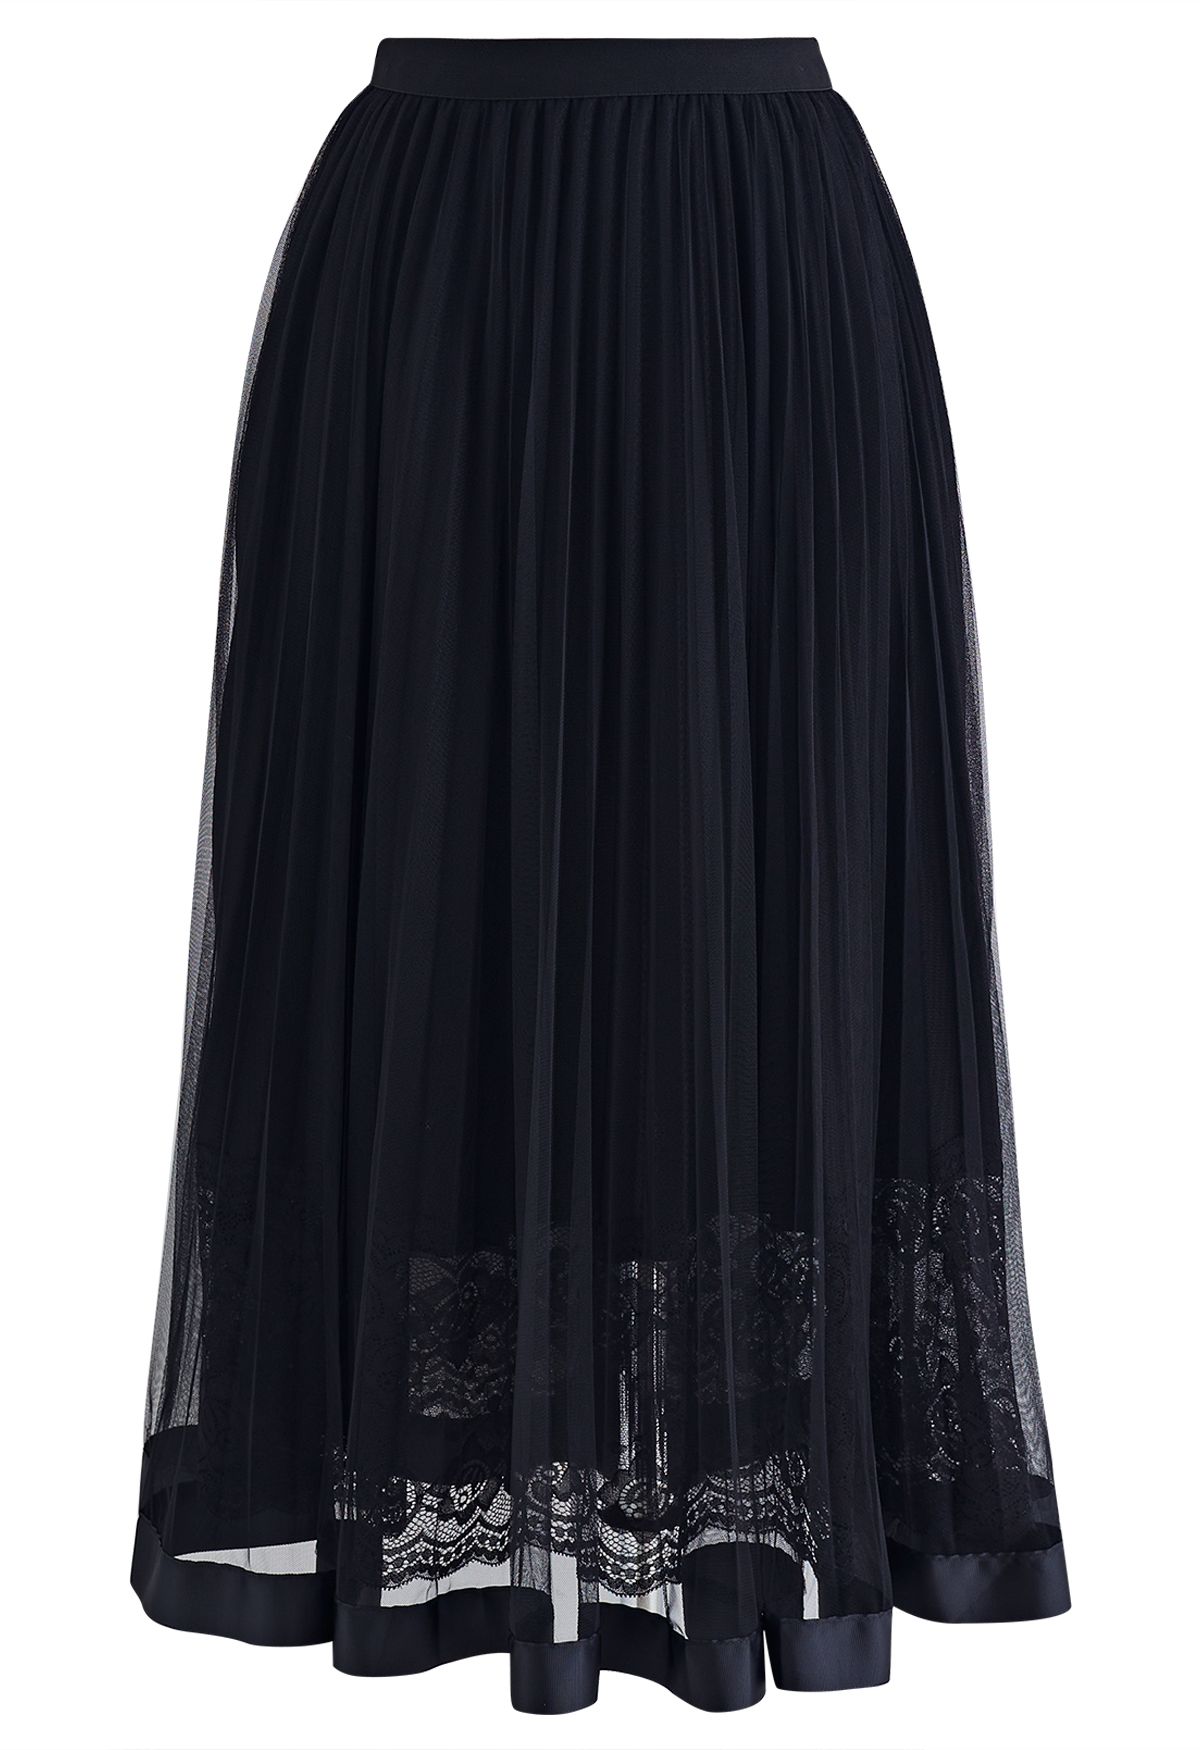 Lace Hem Double-Layered Mesh Midi Skirt in Black - Retro, Indie and ...